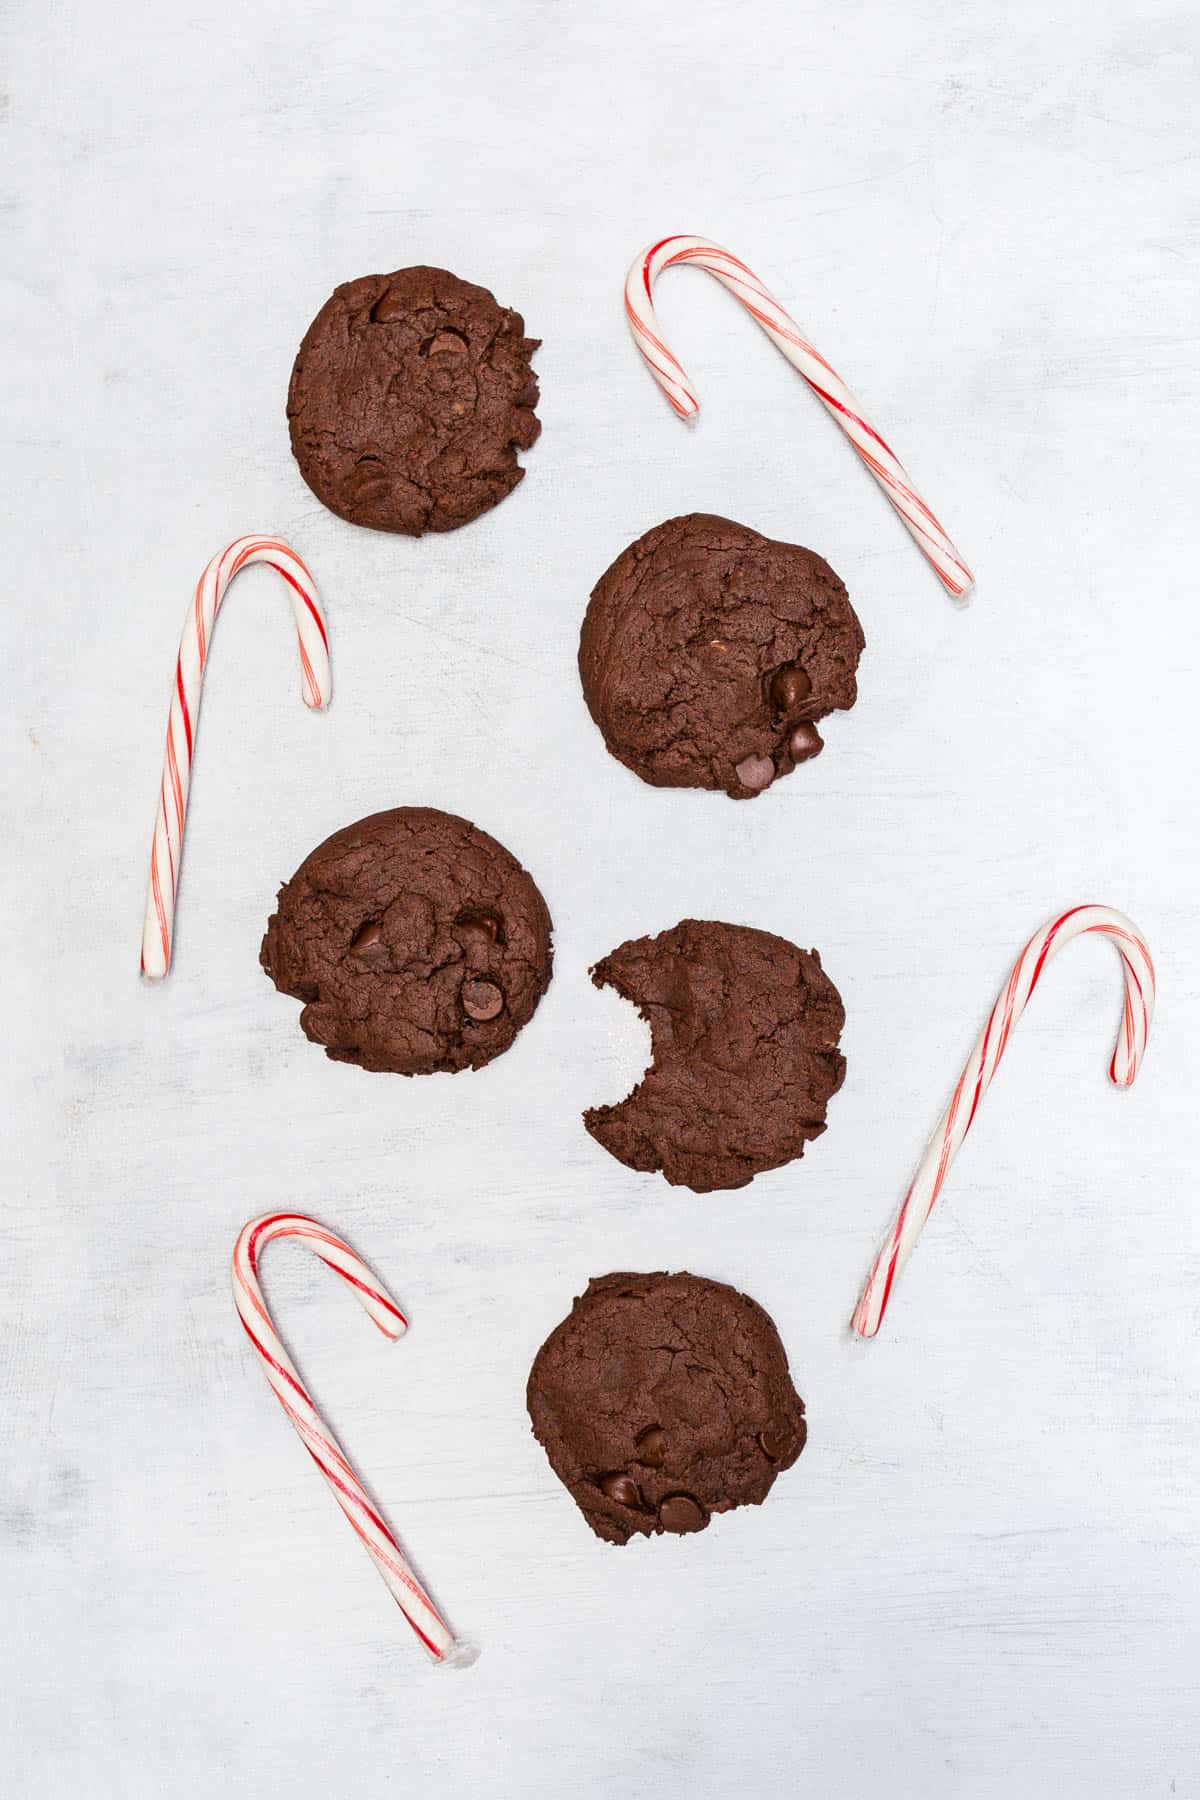 Chocolate cookies on silver background with candy canes